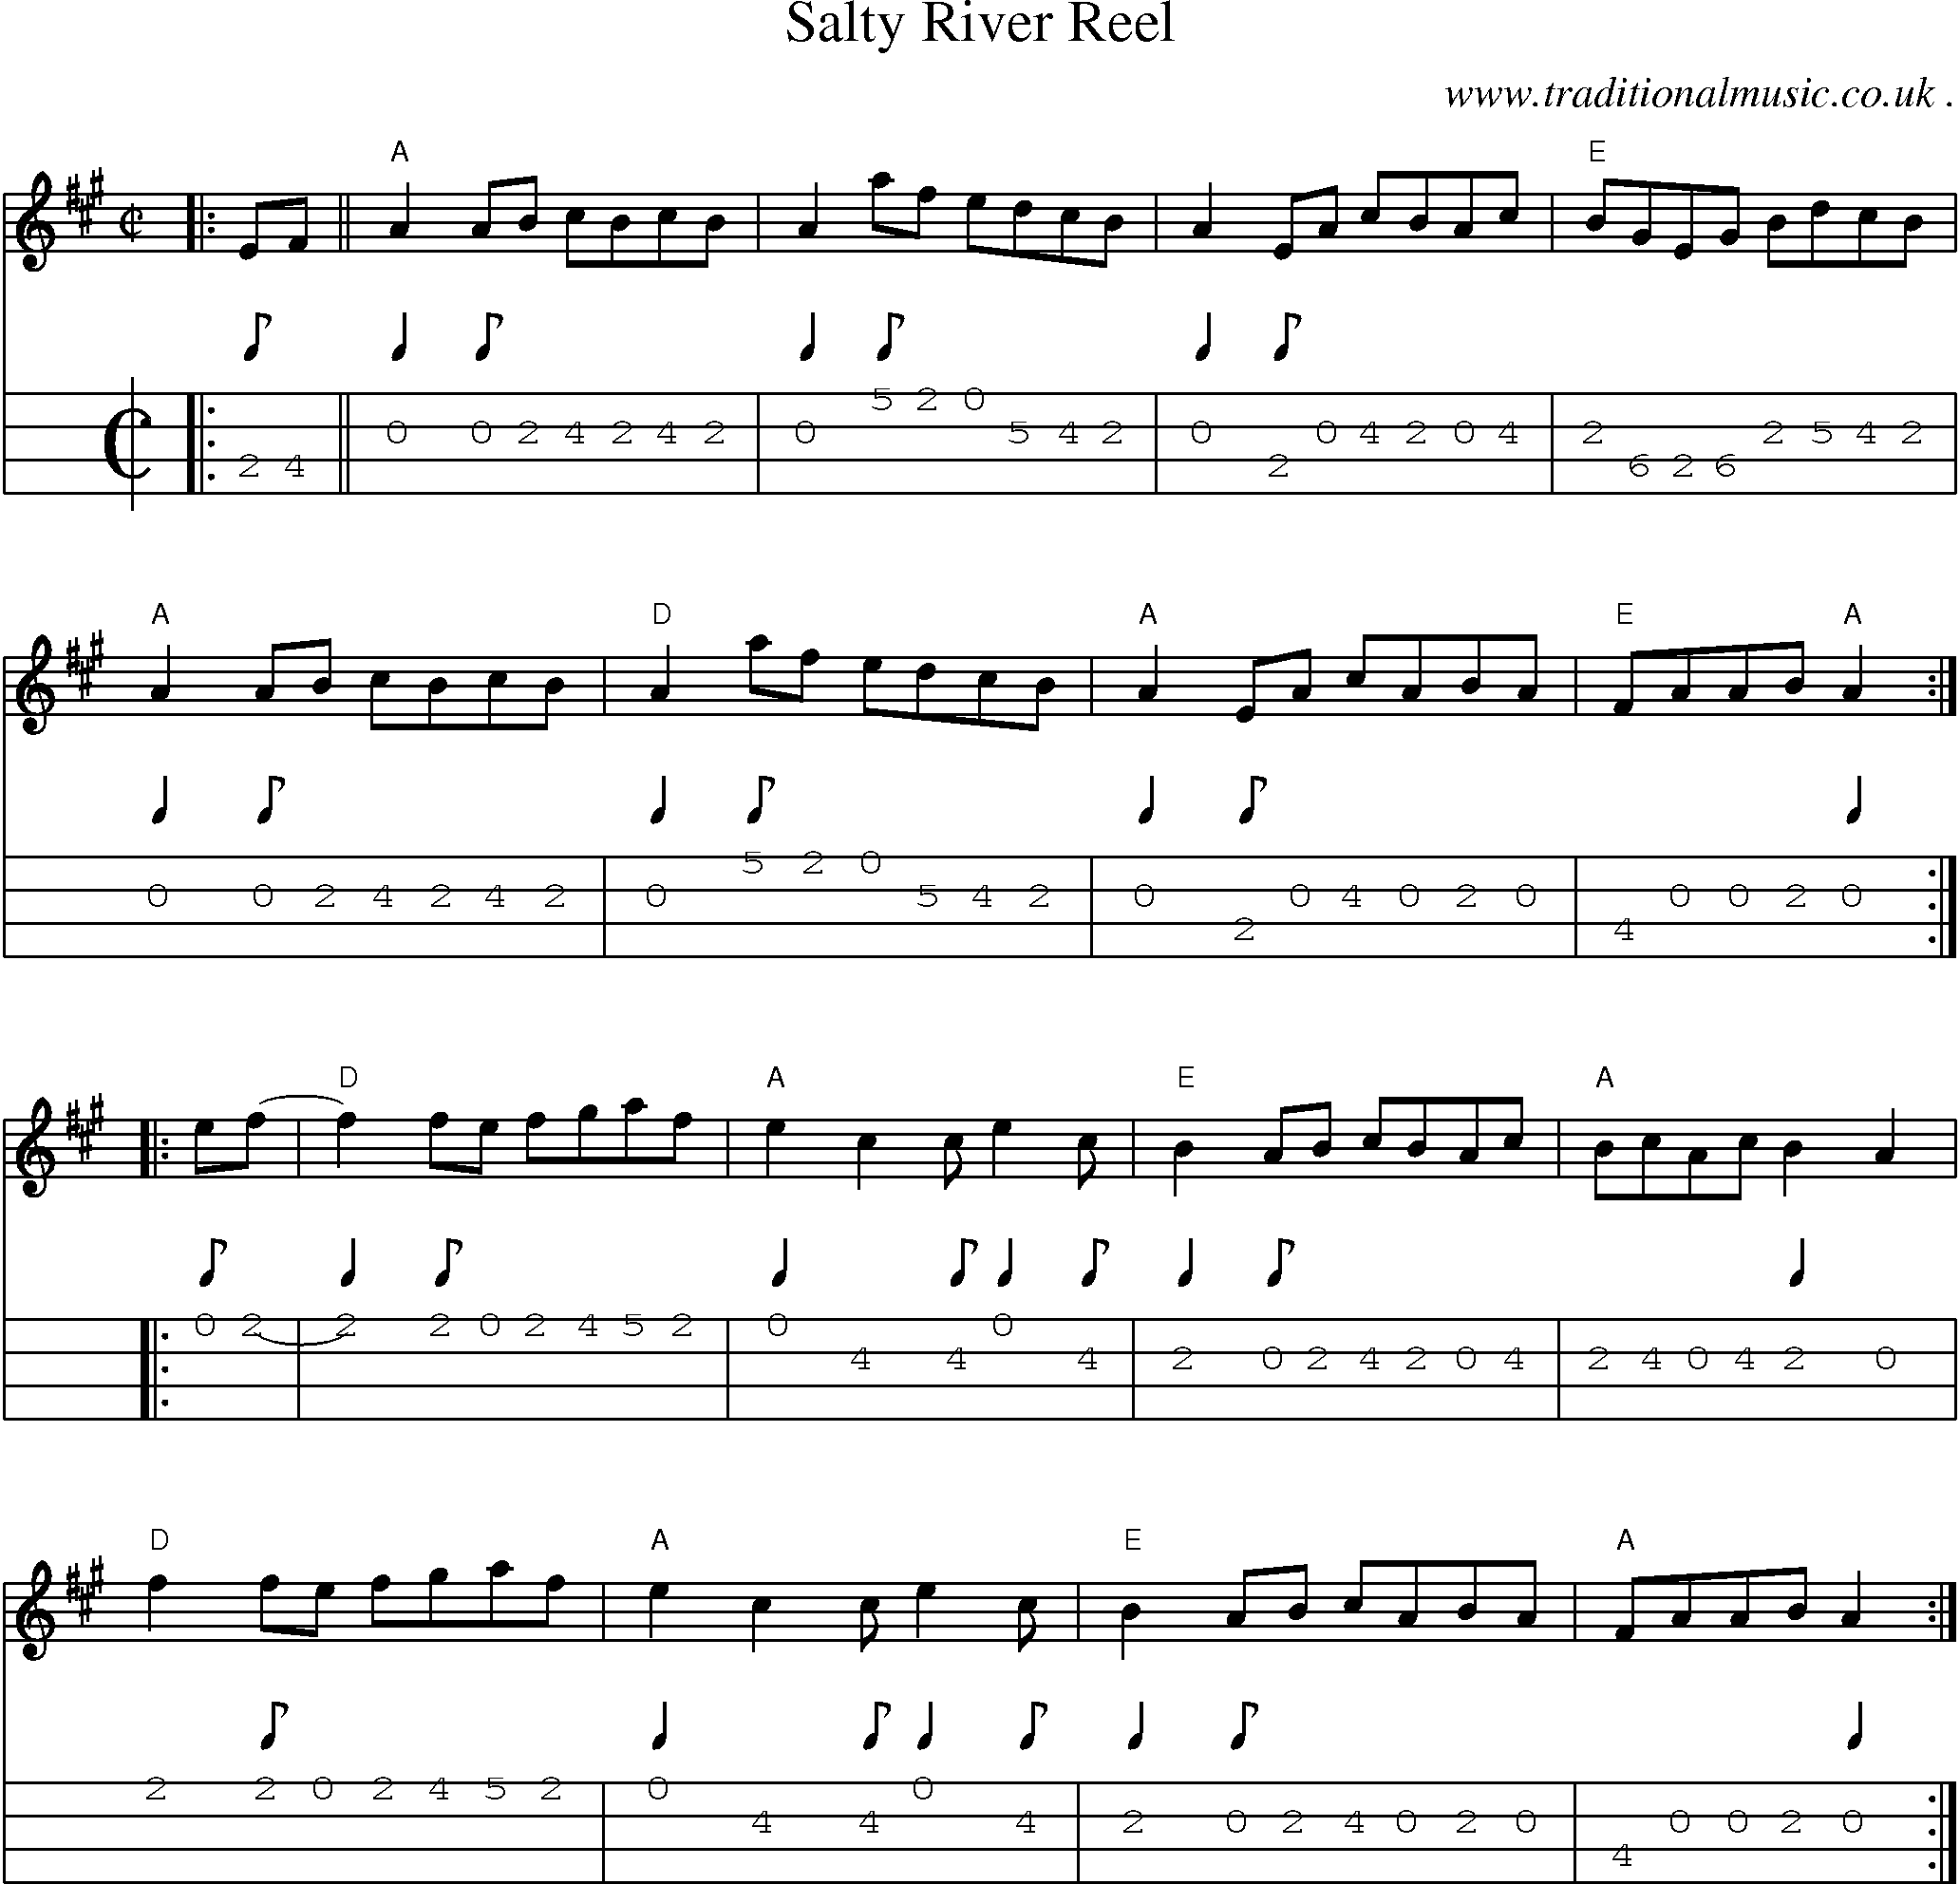 Music Score and Mandolin Tabs for Salty River Reel